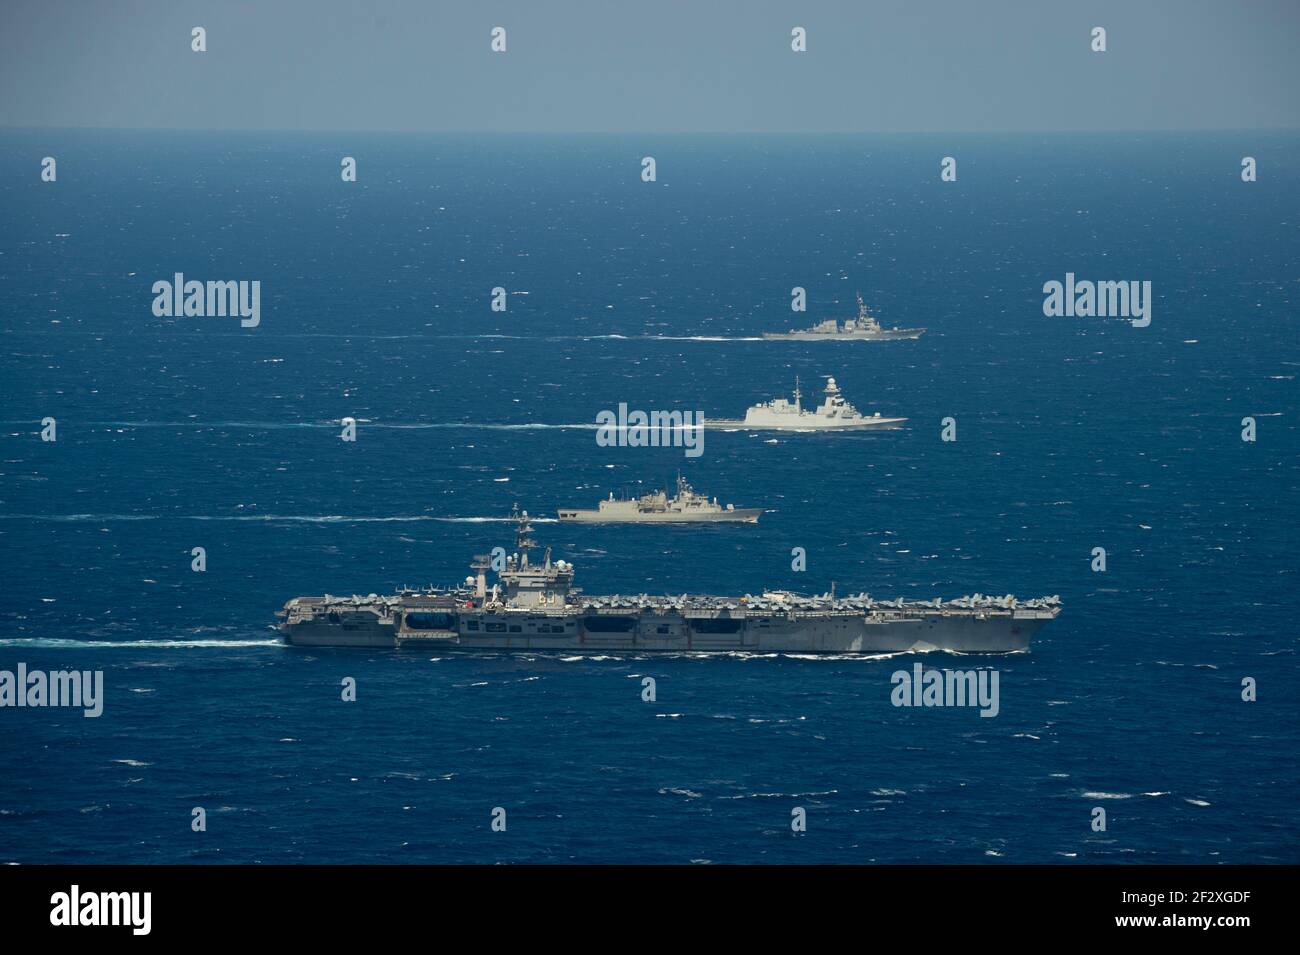 The U.S. Navy Nimitz-class aircraft carrier USS Dwight D. Eisenhower transits the Mediterranean Sea along with the Italian Navy Carlo Bergamini-class frigate Virginio Fasanon, Hellenic Navy Hydra-class frigate Psaraa and Arleigh-Burke class guided-missile destroyer USS Mitscher March 11, 2021 in the Mediterranean Sea. Stock Photo